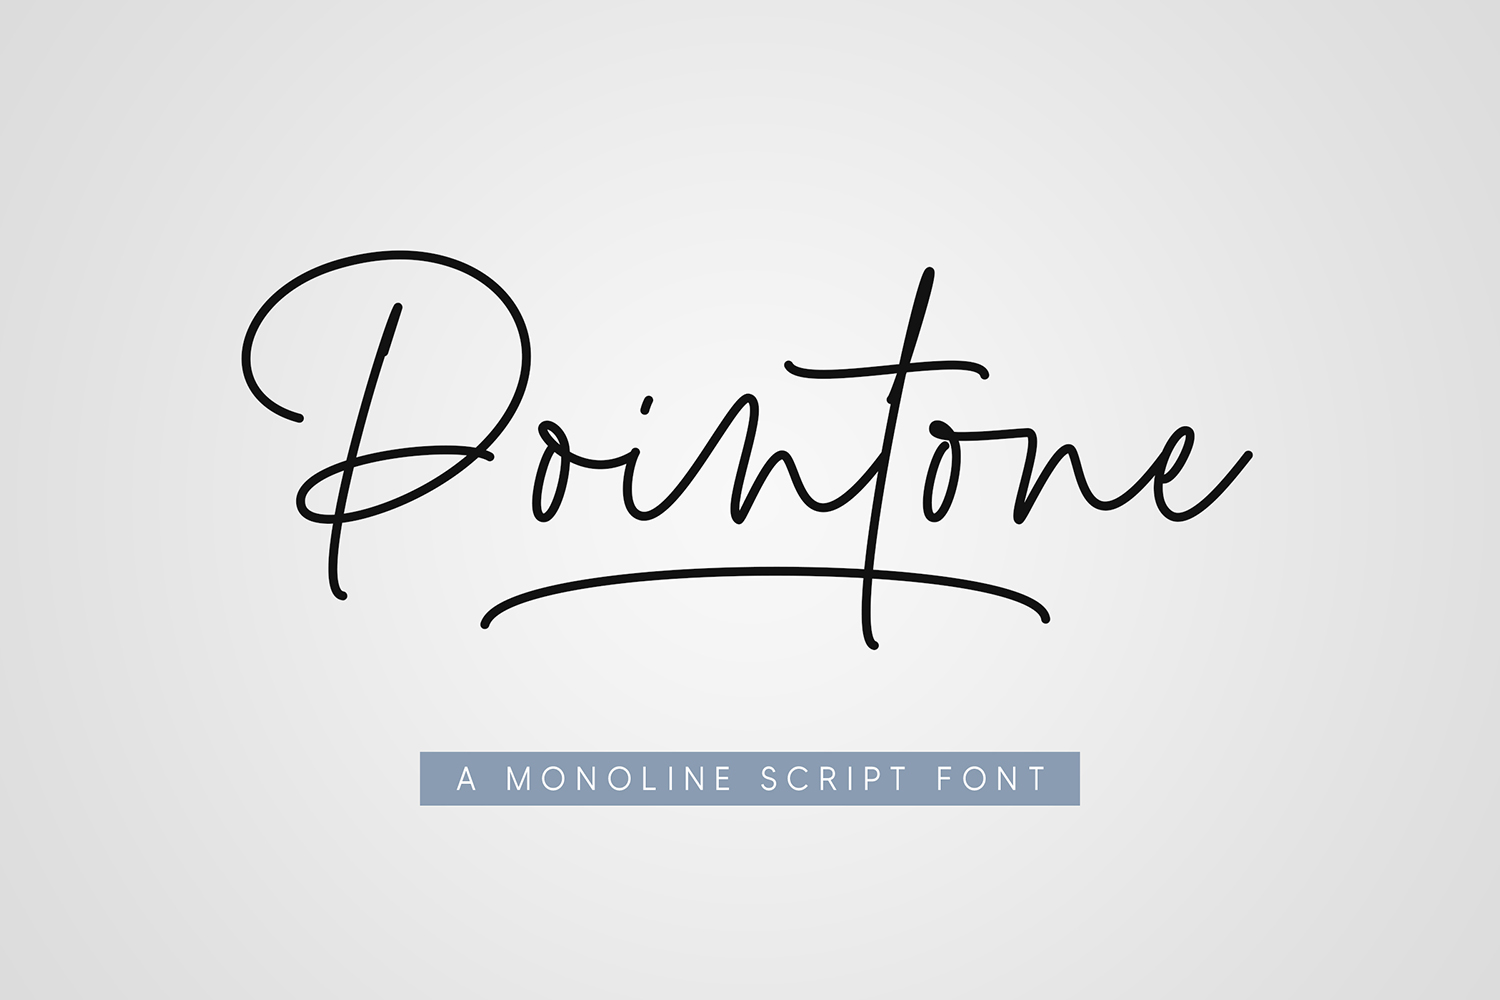 Pointone Free Font